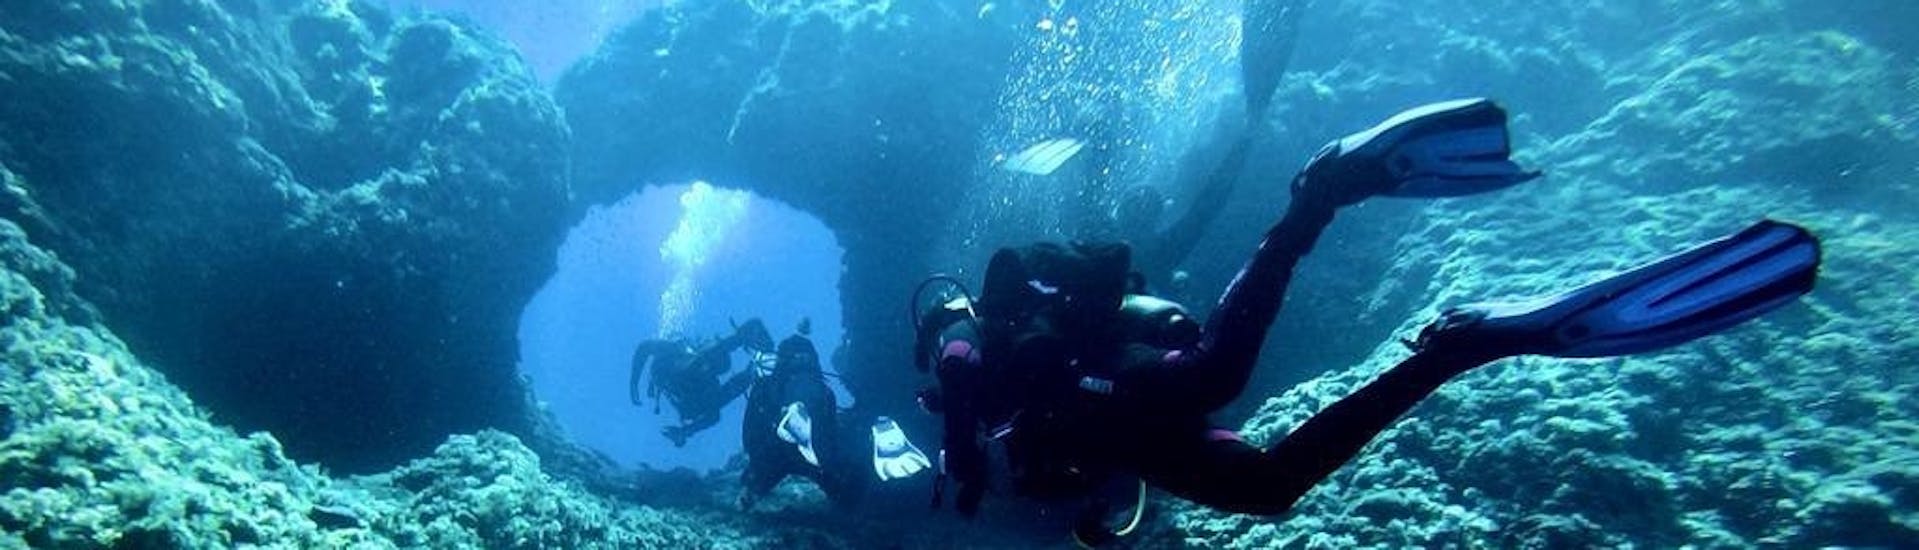 Three divers dive through a cave during the PADI Scuba Diver course in Cala Bona for beginners with Albatros Diving Mallorca.